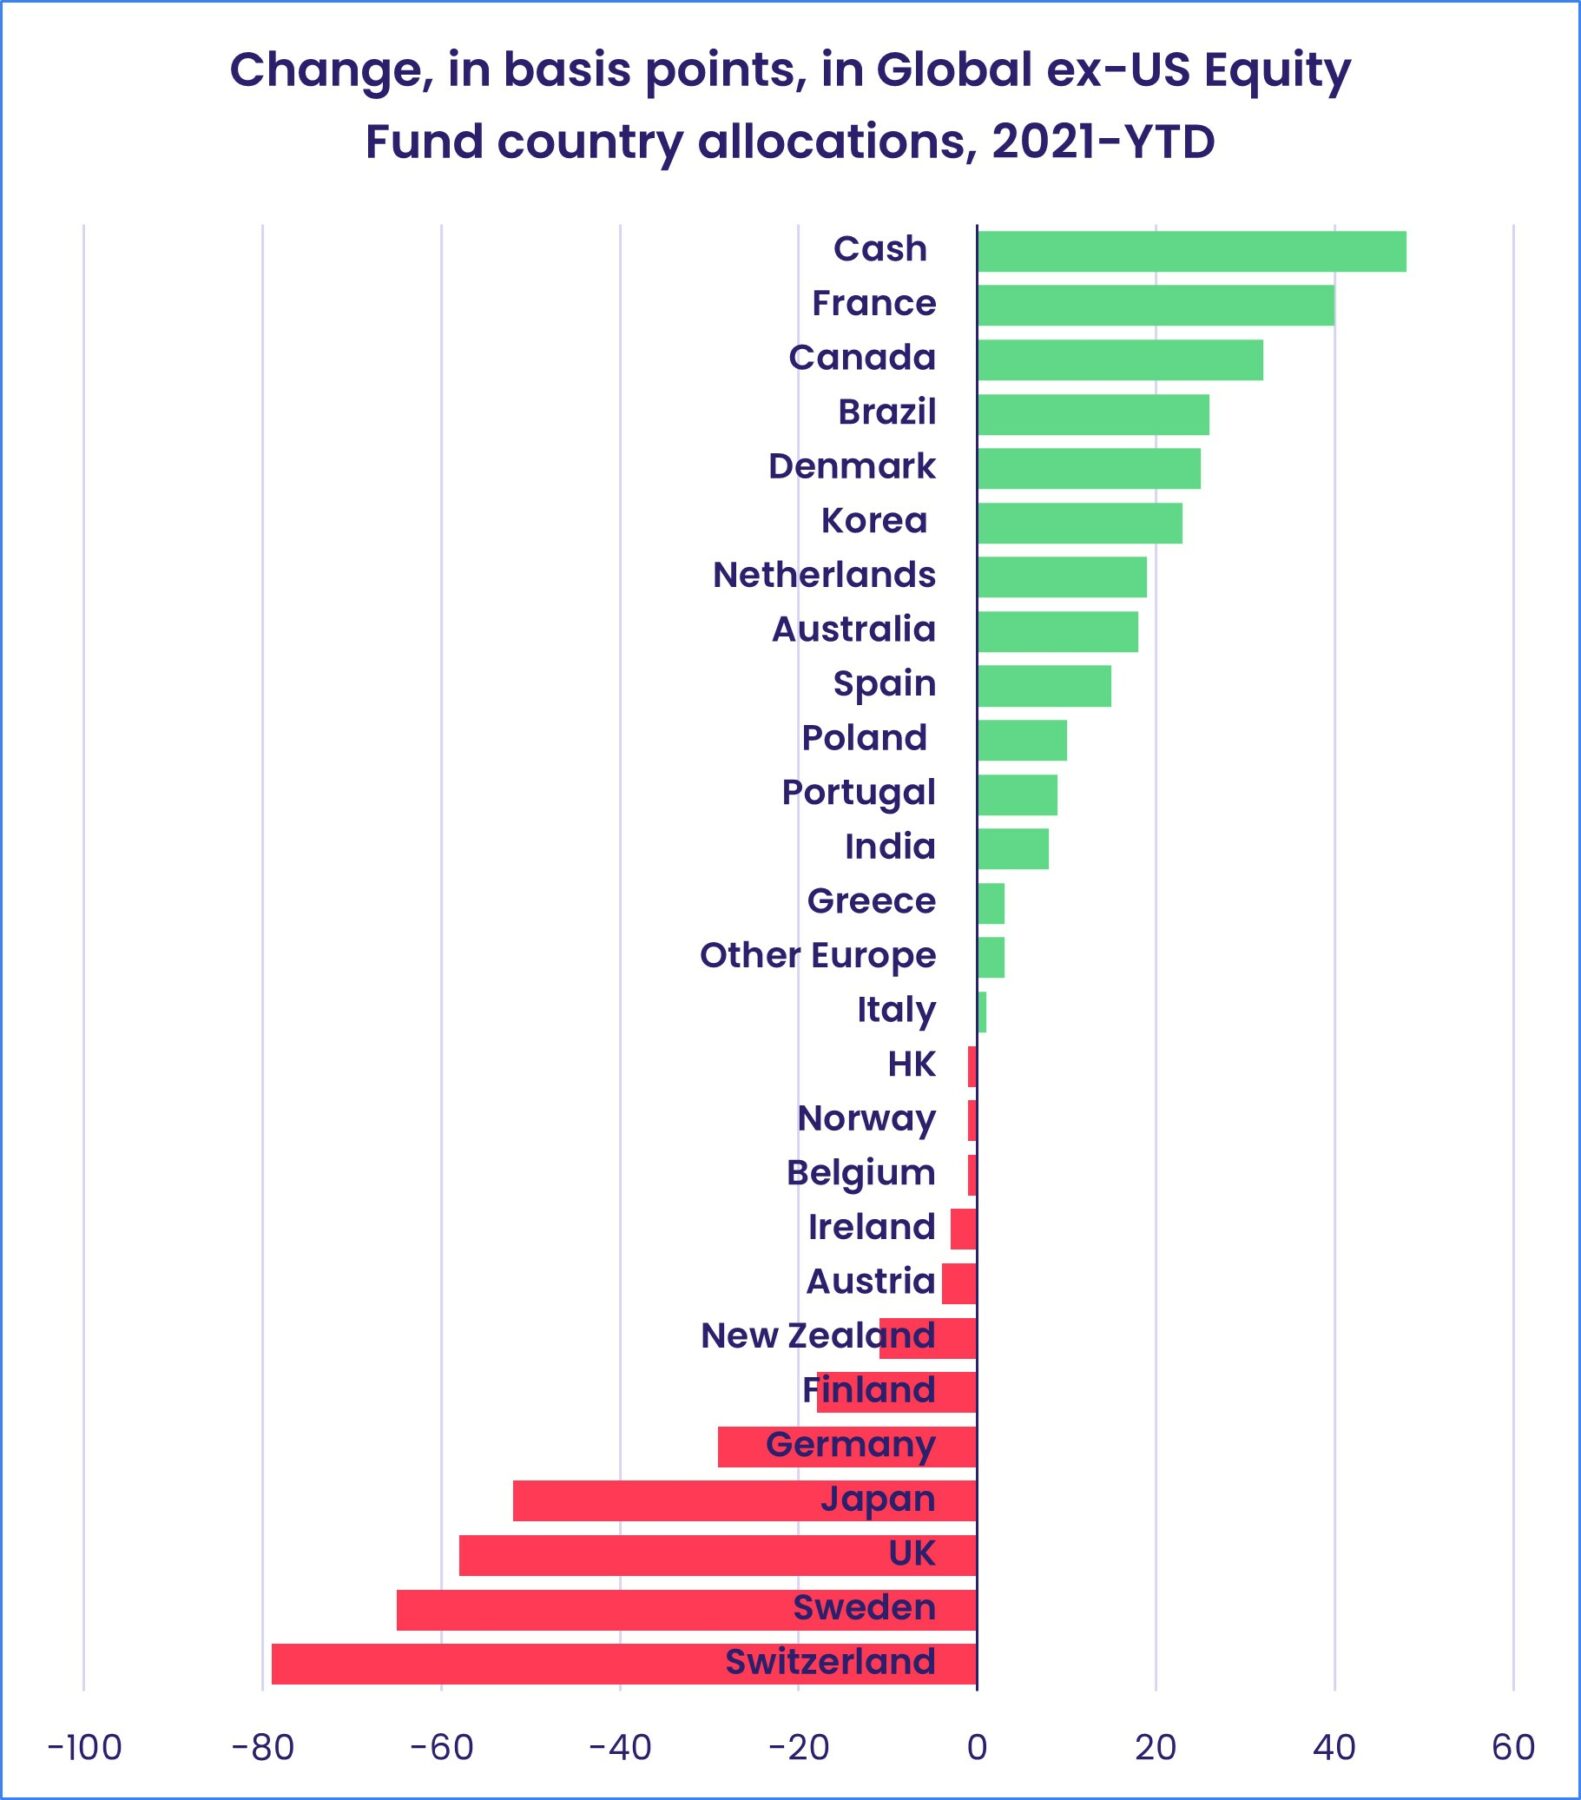 Image of a chart representing "Change, in basis points, in Global ex-US Equity Find country allocations, 2021-YTD"